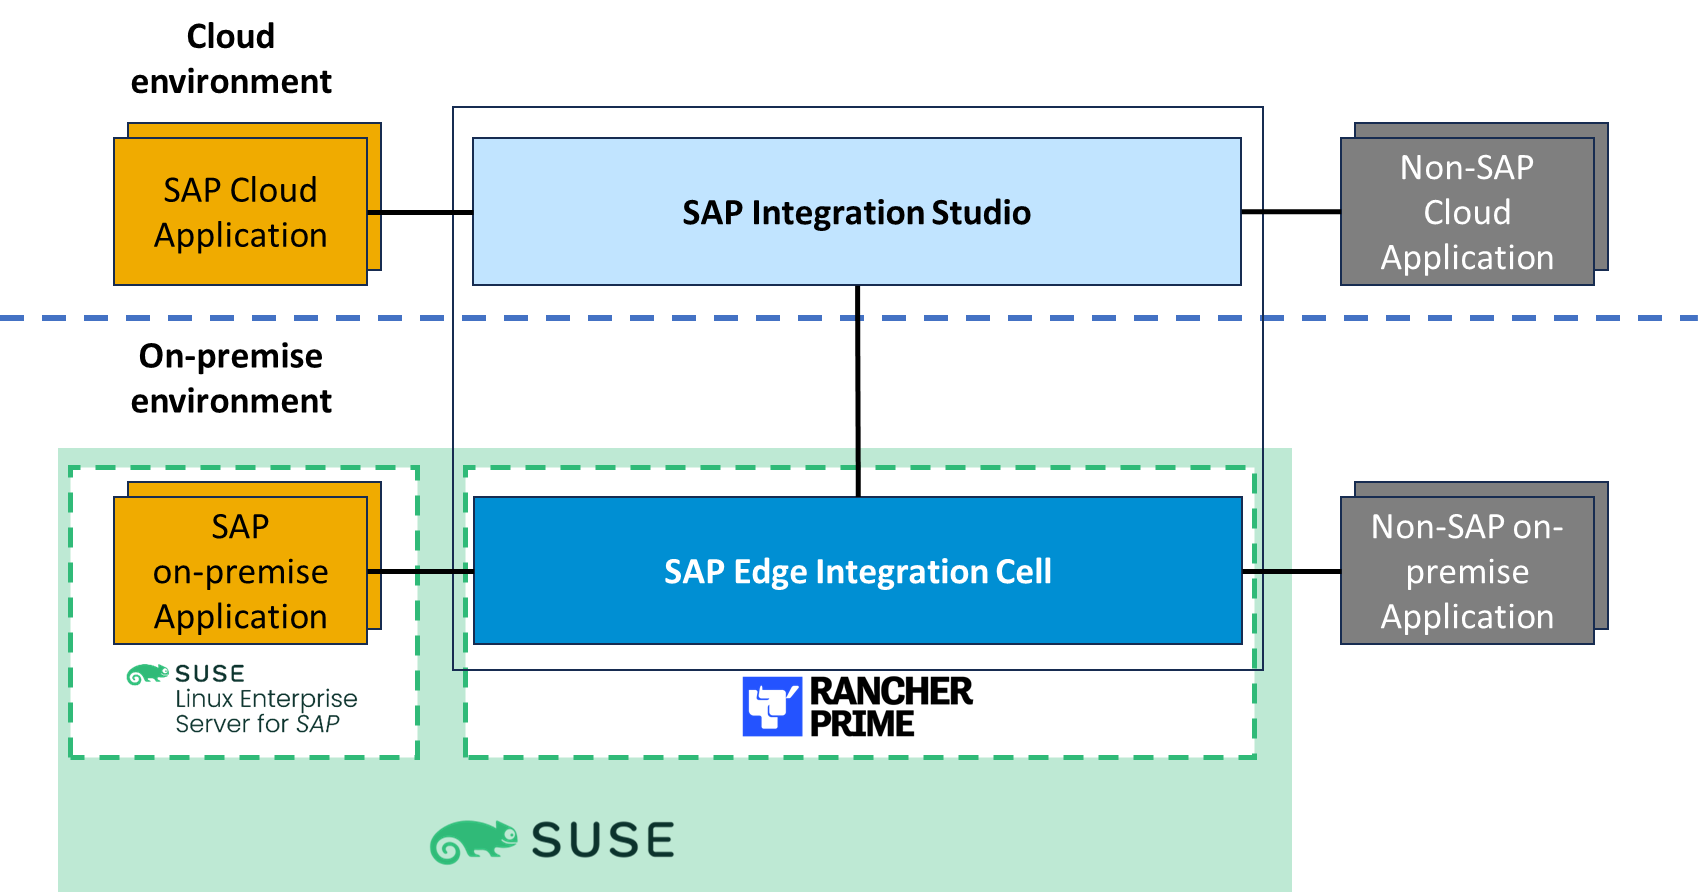 SAP Edge Integration Cell running on Rancher by SUSE